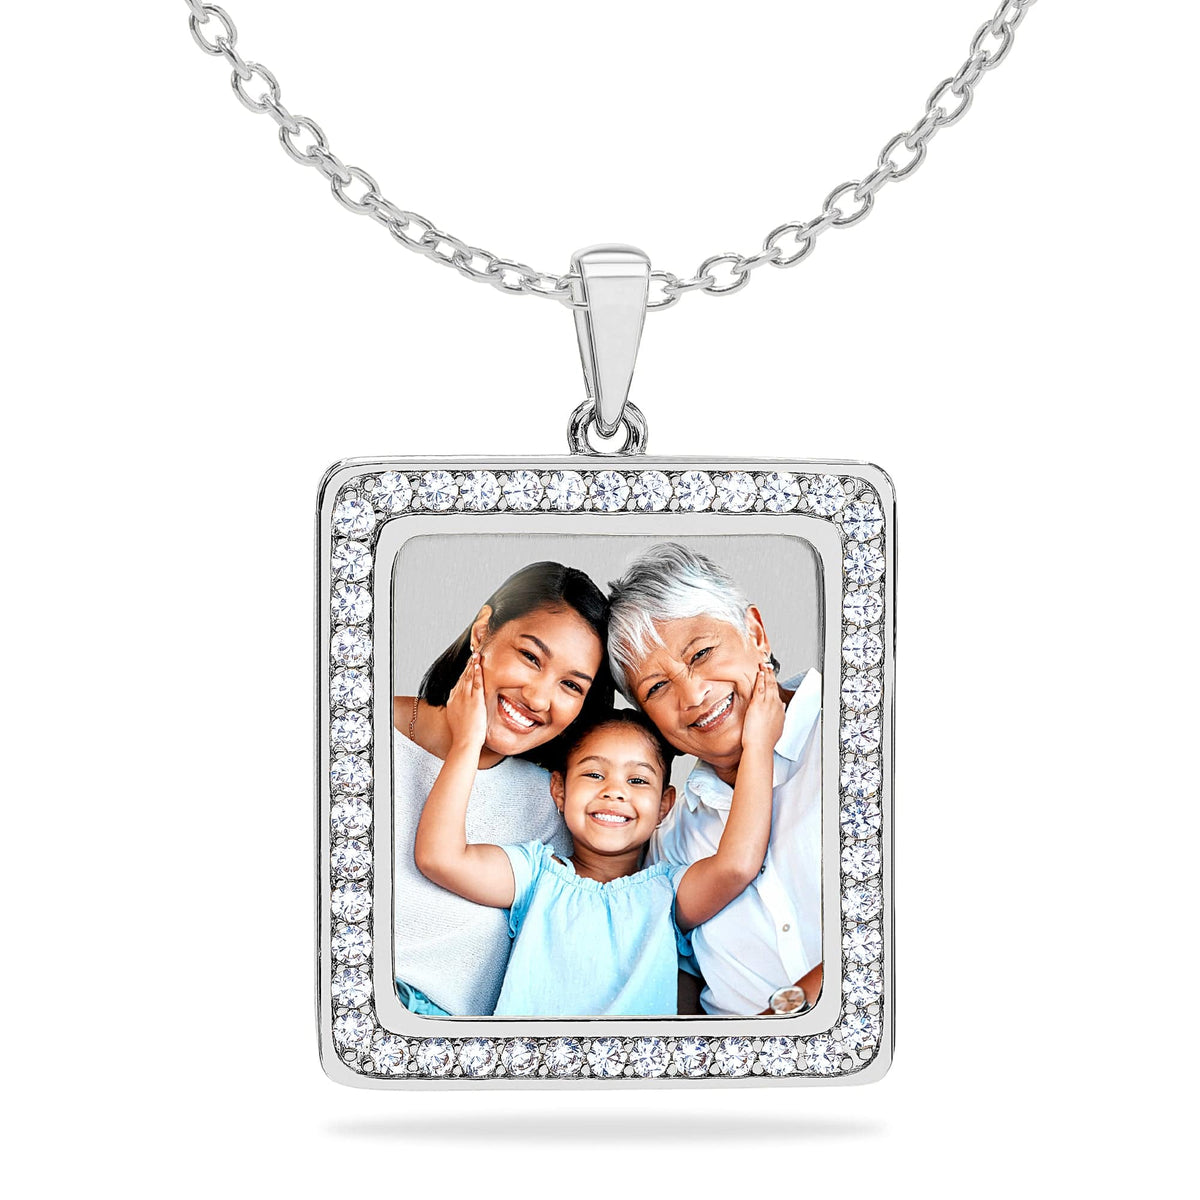 Silver Plated / Link Chain Square Photo Pendant with Stones